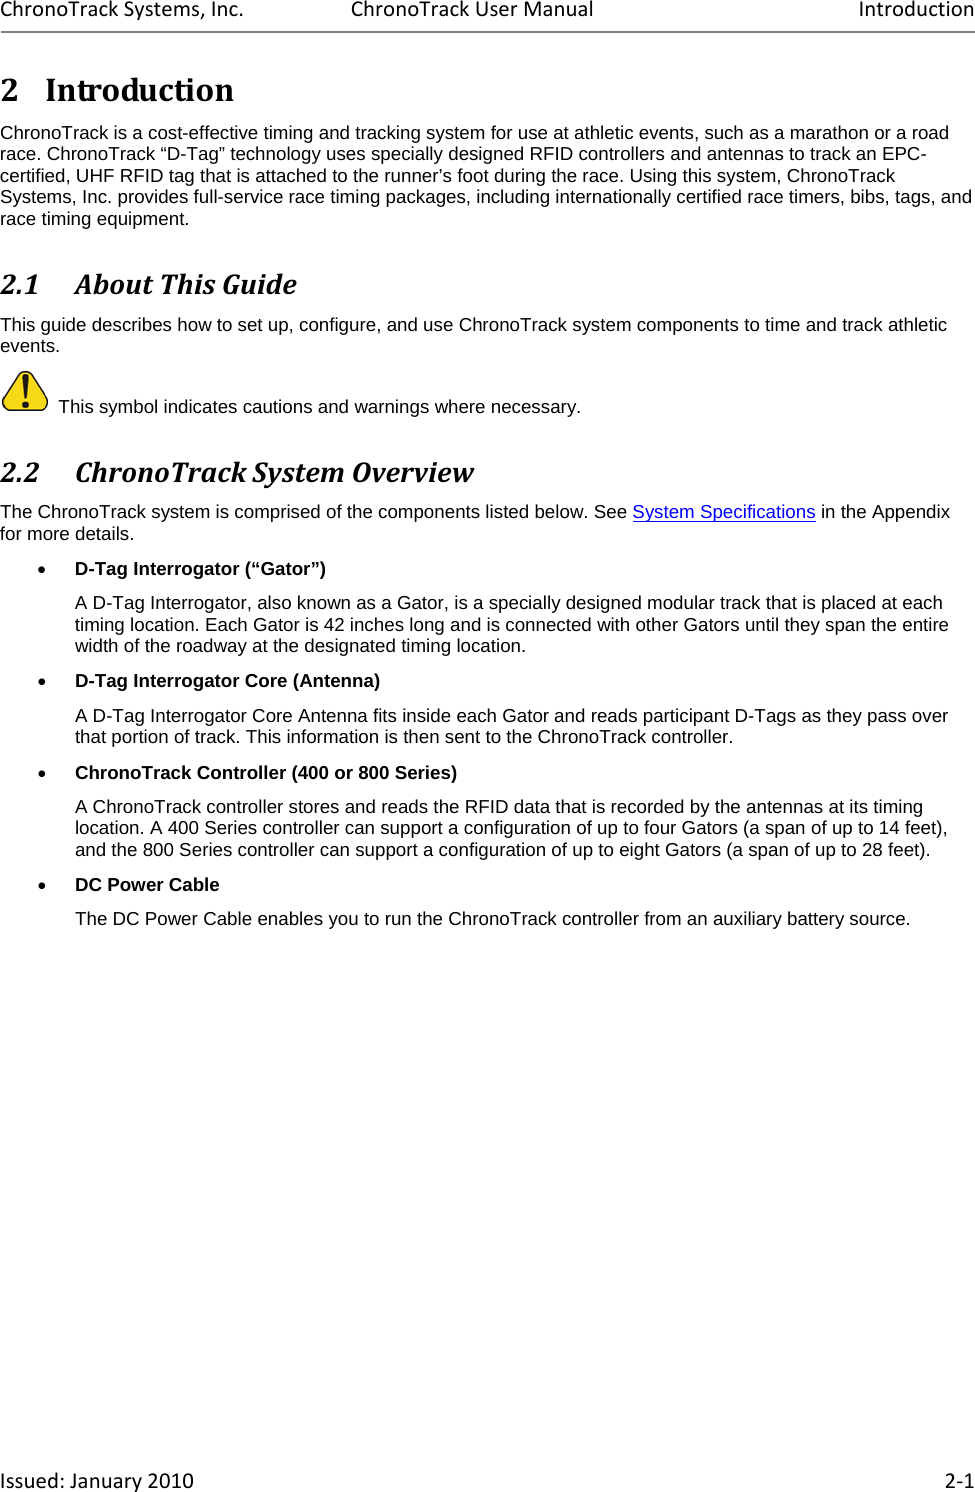 ChronoTrackSystems,Inc.ChronoTrackUserManualIntroductionIssued:January2010 2‐12 IntroductionChronoTrack is a cost-effective timing and tracking system for use at athletic events, such as a marathon or a road race. ChronoTrack “D-Tag” technology uses specially designed RFID controllers and antennas to track an EPC-certified, UHF RFID tag that is attached to the runner’s foot during the race. Using this system, ChronoTrack Systems, Inc. provides full-service race timing packages, including internationally certified race timers, bibs, tags, and race timing equipment. 2.1 AboutThisGuideThis guide describes how to set up, configure, and use ChronoTrack system components to time and track athletic events.   This symbol indicates cautions and warnings where necessary.  2.2 ChronoTrackSystemOverviewThe ChronoTrack system is comprised of the components listed below. See System Specifications in the Appendix for more details.  D-Tag Interrogator (“Gator”)  A D-Tag Interrogator, also known as a Gator, is a specially designed modular track that is placed at each timing location. Each Gator is 42 inches long and is connected with other Gators until they span the entire width of the roadway at the designated timing location.  D-Tag Interrogator Core (Antenna) A D-Tag Interrogator Core Antenna fits inside each Gator and reads participant D-Tags as they pass over that portion of track. This information is then sent to the ChronoTrack controller.  ChronoTrack Controller (400 or 800 Series)  A ChronoTrack controller stores and reads the RFID data that is recorded by the antennas at its timing location. A 400 Series controller can support a configuration of up to four Gators (a span of up to 14 feet), and the 800 Series controller can support a configuration of up to eight Gators (a span of up to 28 feet).  DC Power Cable The DC Power Cable enables you to run the ChronoTrack controller from an auxiliary battery source. 